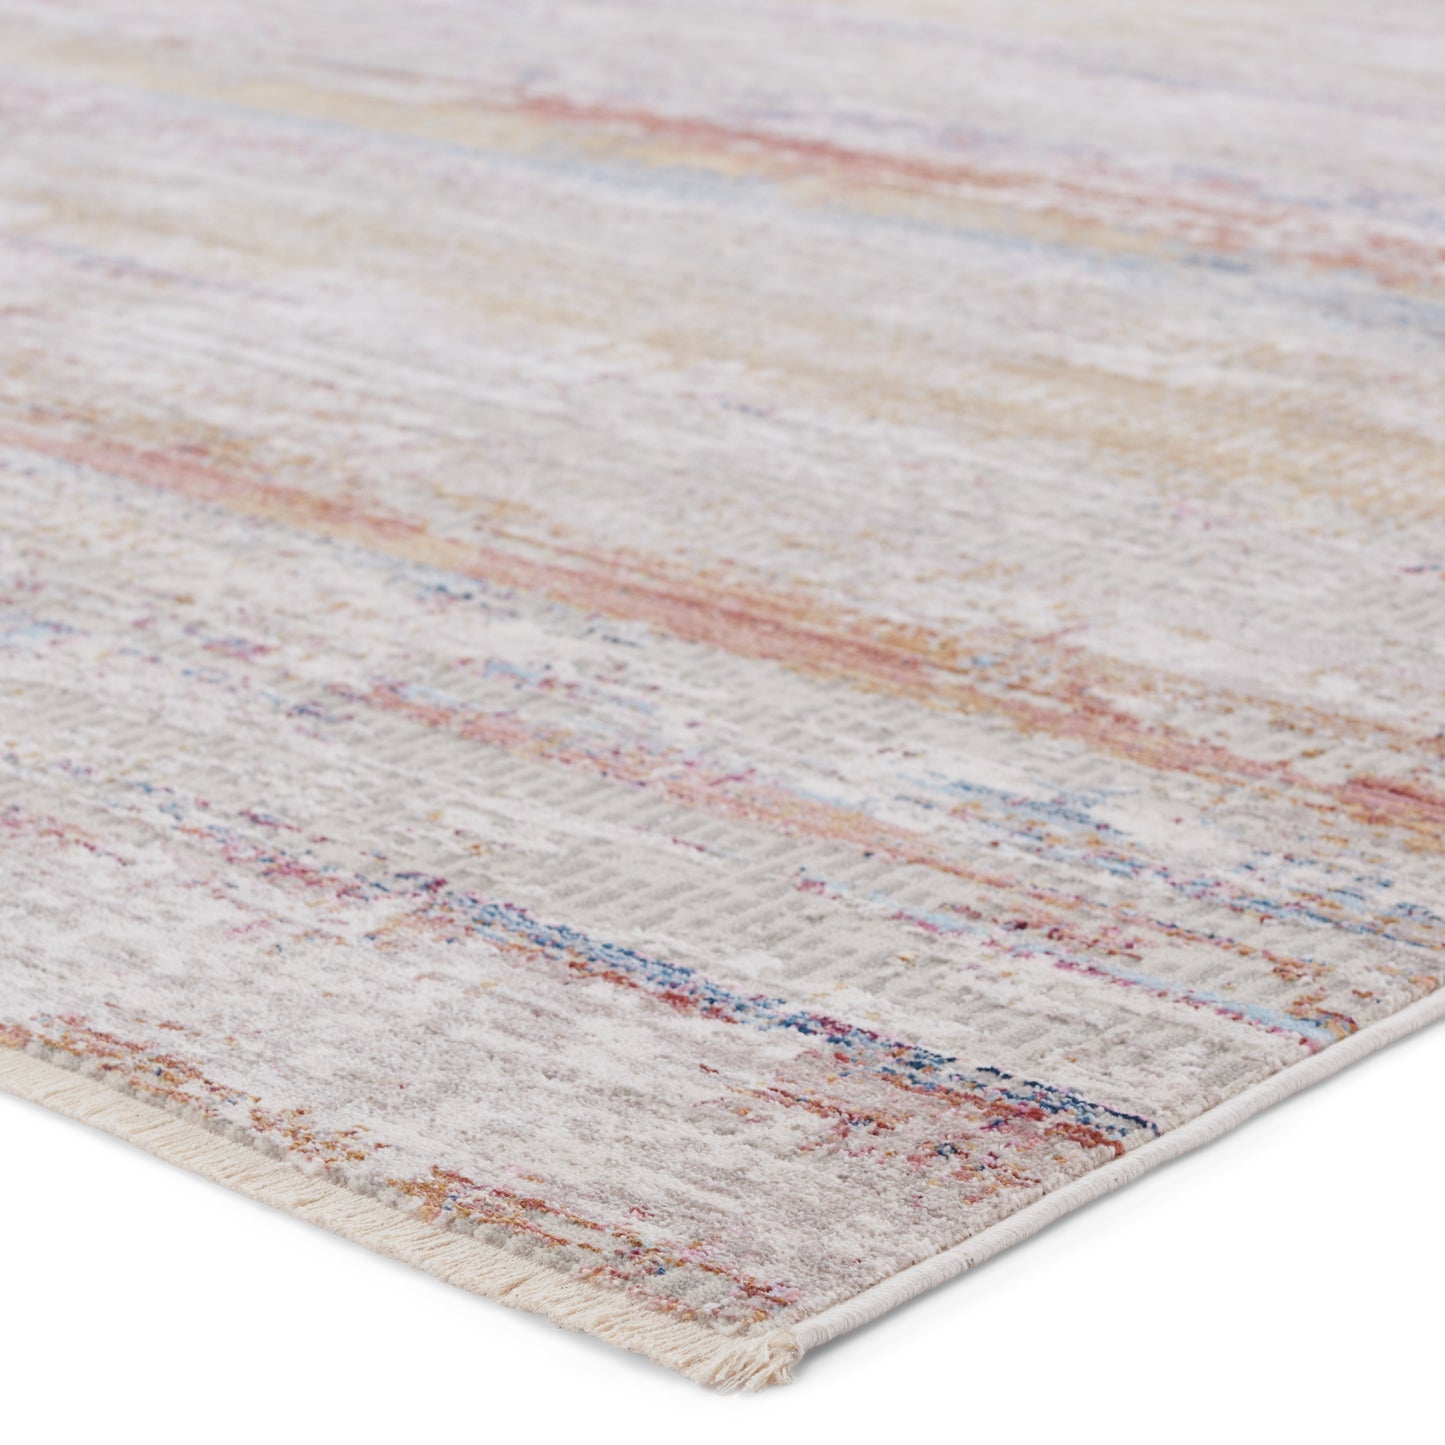 Audun Alzea Machine Made Synthetic Blend Indoor Area Rug From Vibe by Jaipur Living